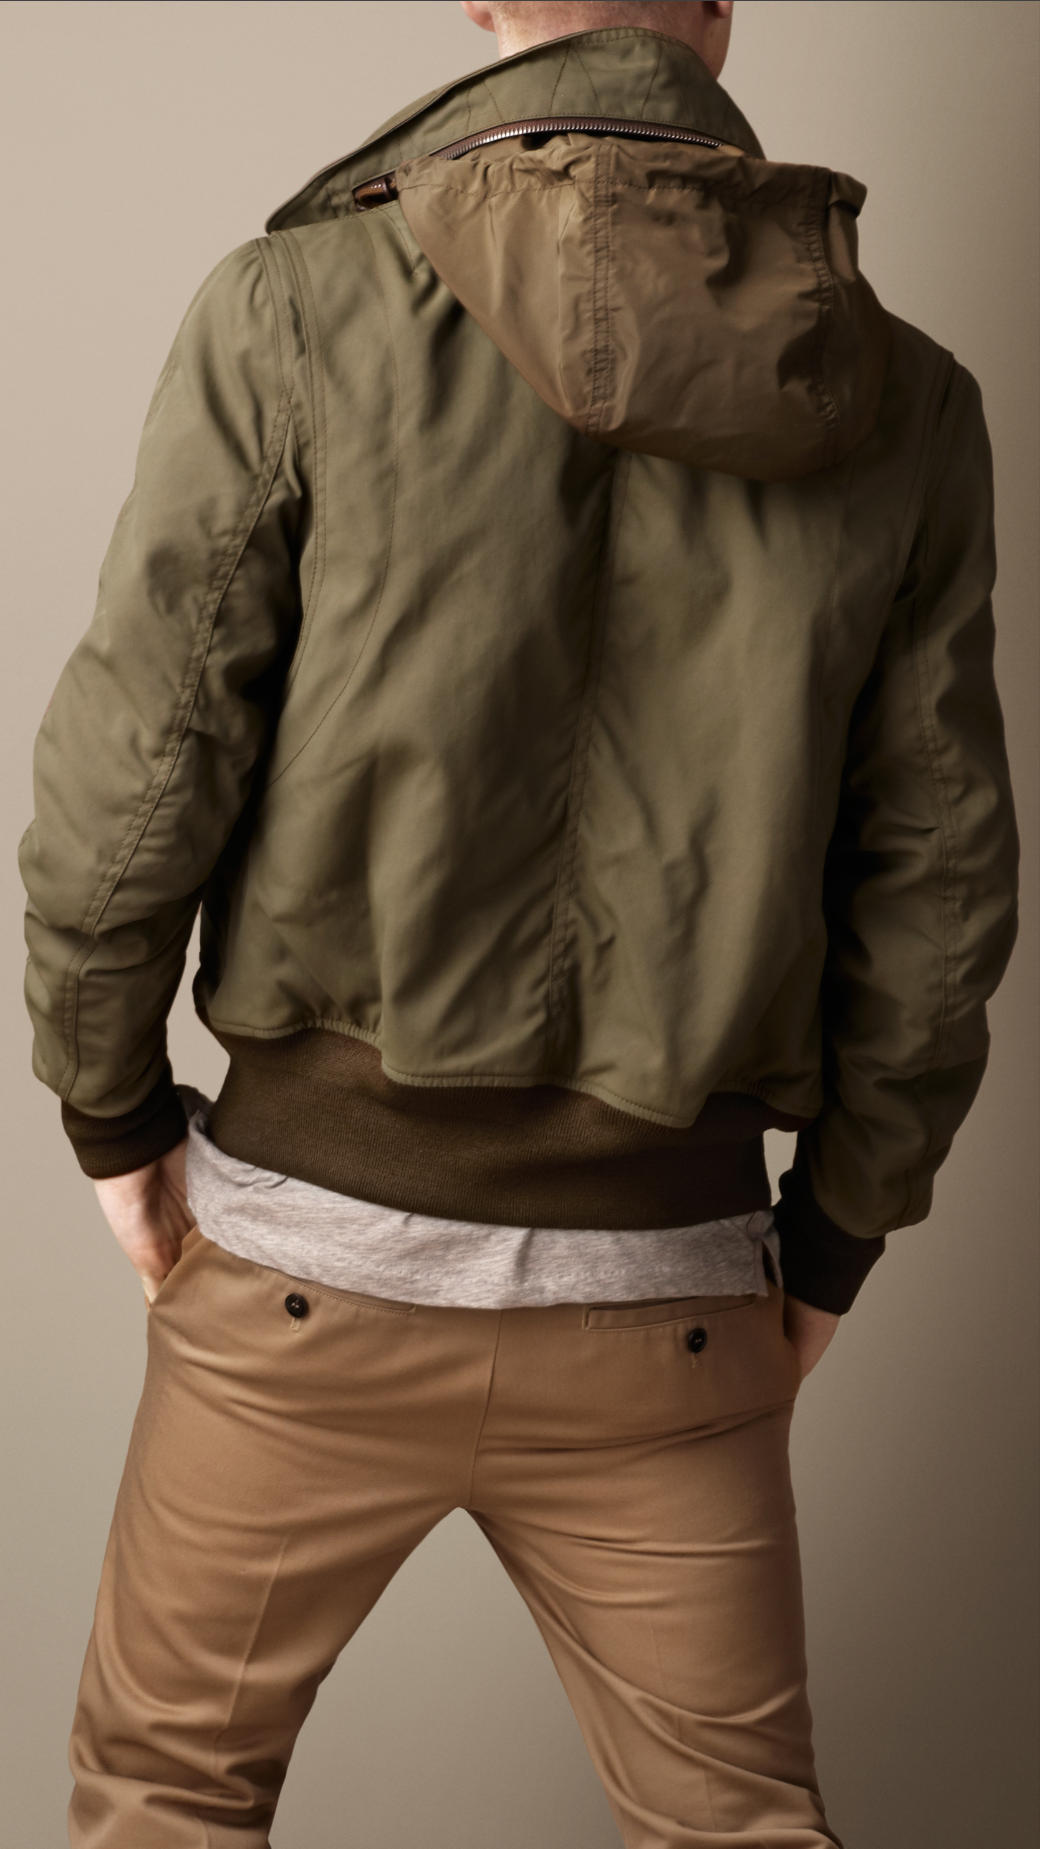 Lyst - Burberry Brit Waxed Cotton Bomber Jacket in Green for Men